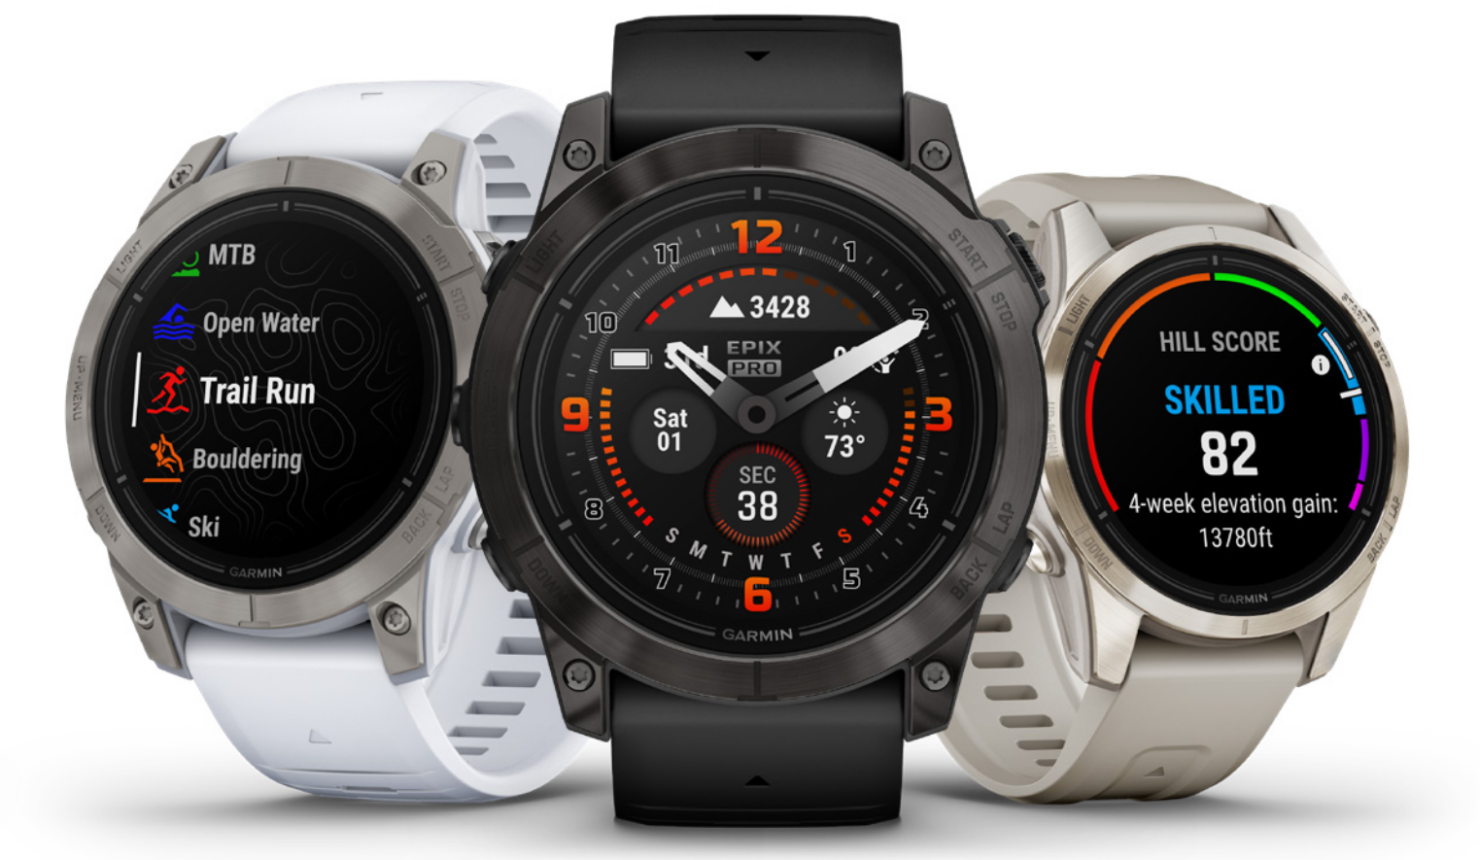 Garmin Epix 2 Pro series smartwatch with an AMOLED display offered in 3  sizes Unveiled - Gizmochina